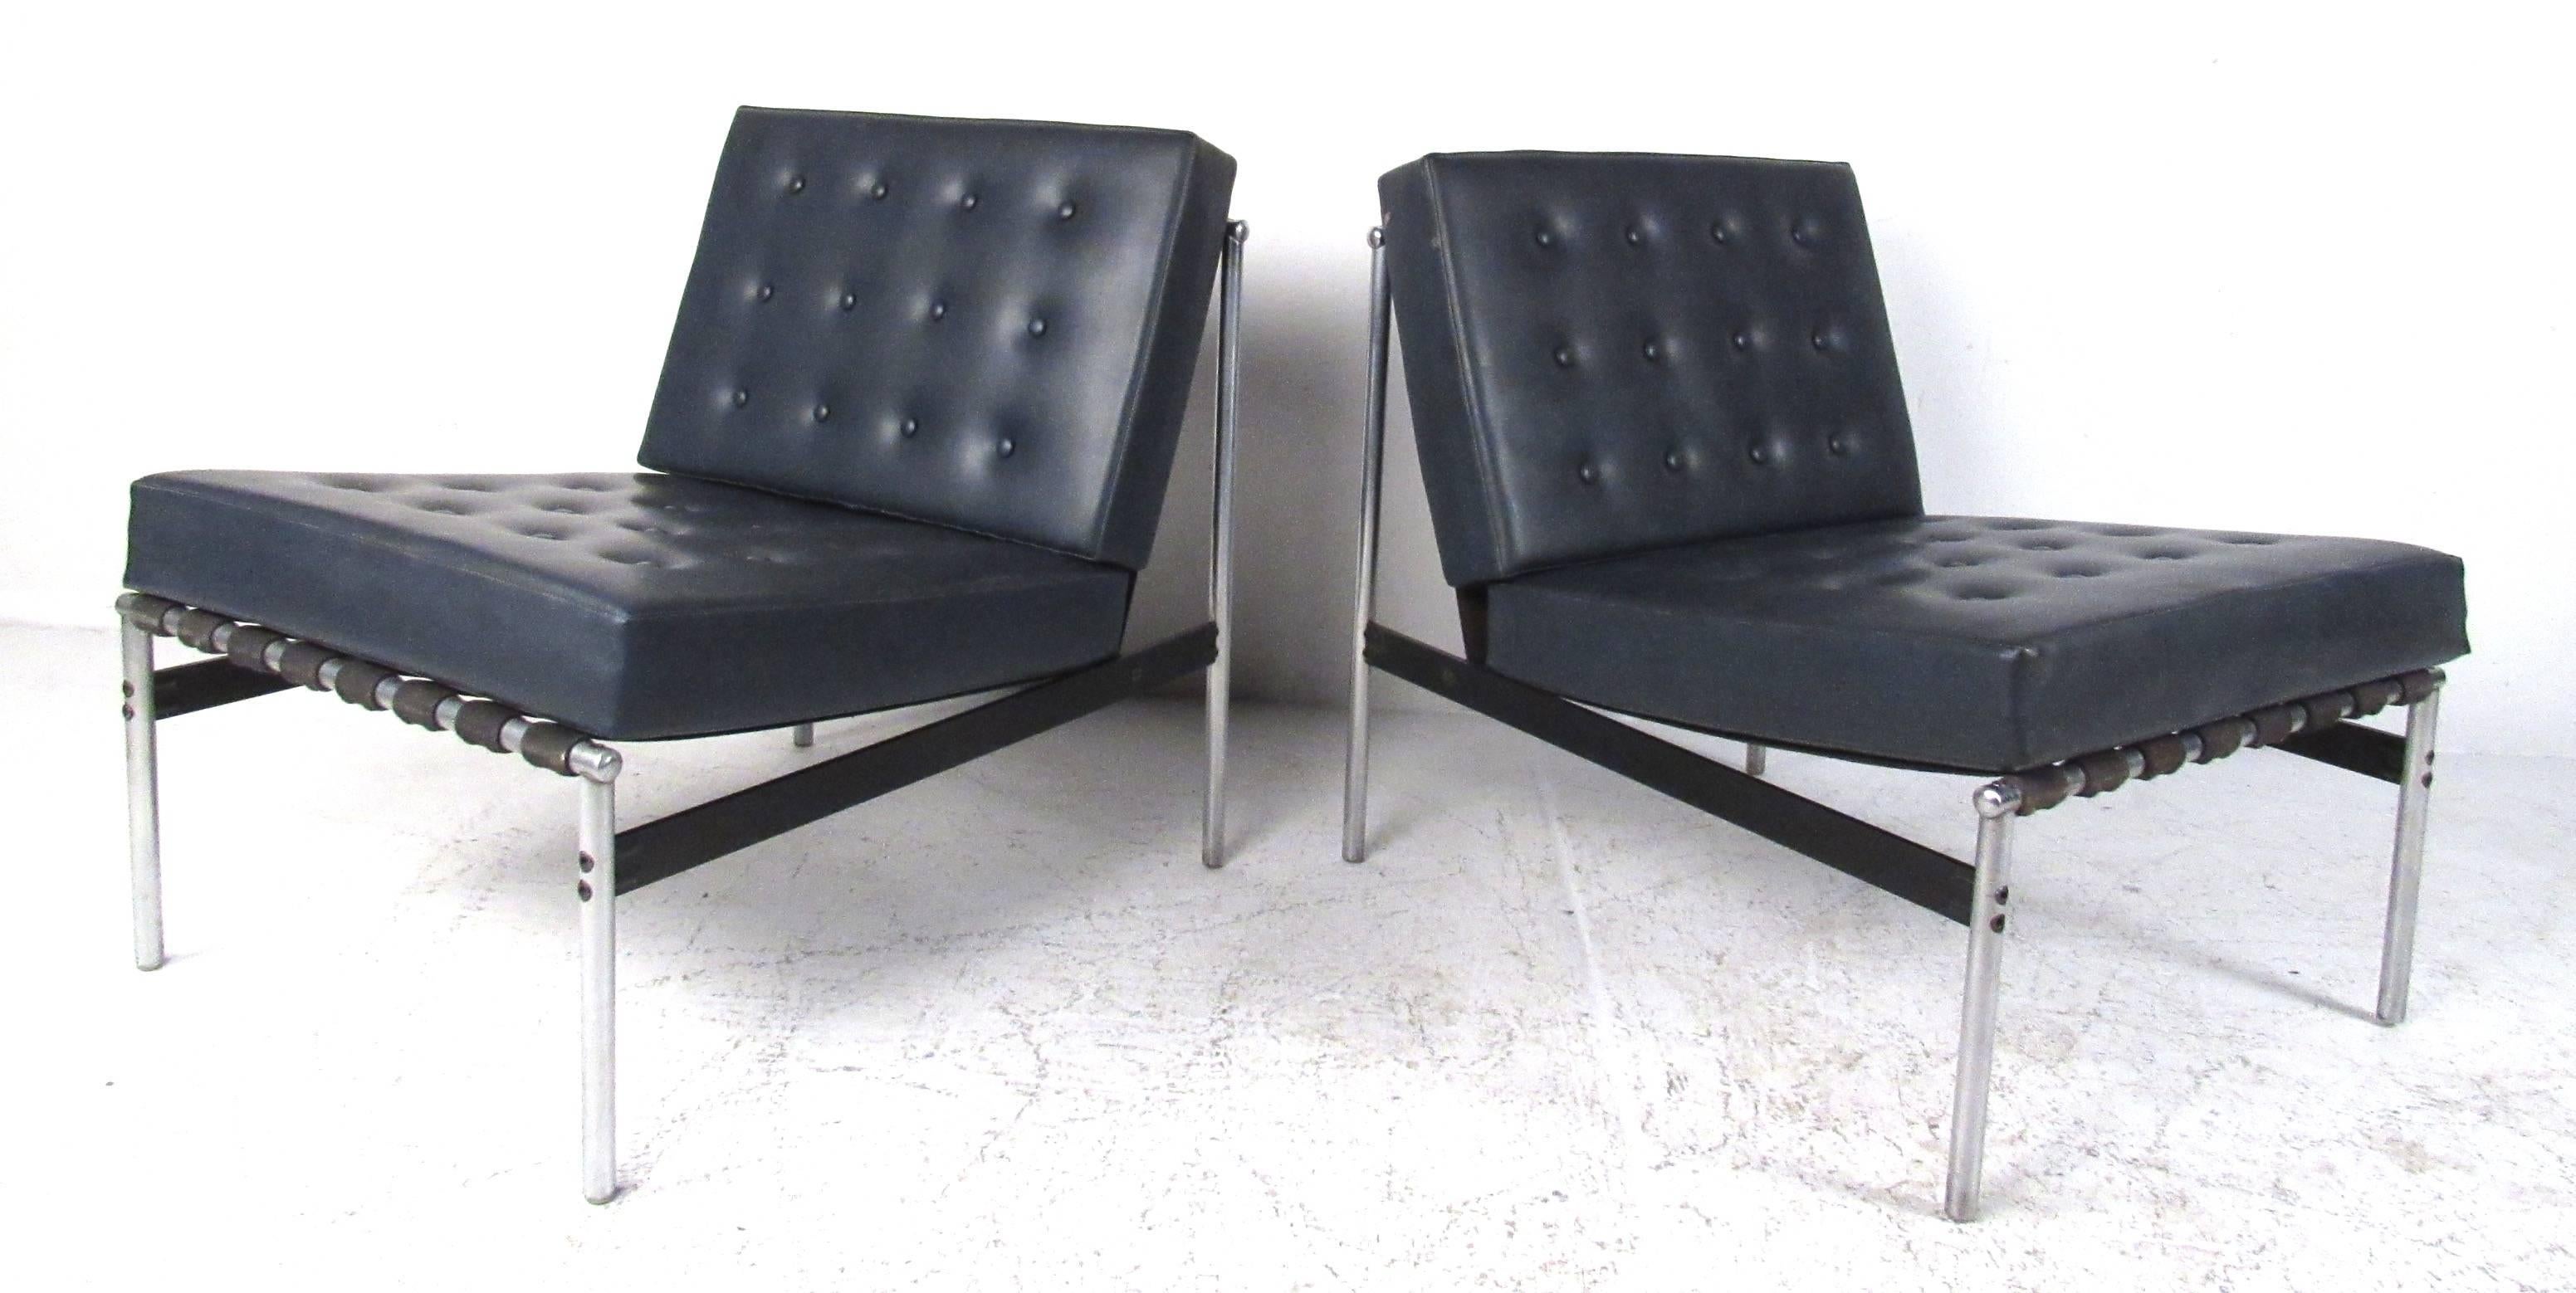 Pair of parallel bar style tufted vinyl slipper chairs in the style of Florence Knoll. Mid-Century Modern styling with black vinyl cushions supported by tubular aluminium frames and woven straps. 
Please confirm item location (NY or NJ) with dealer.